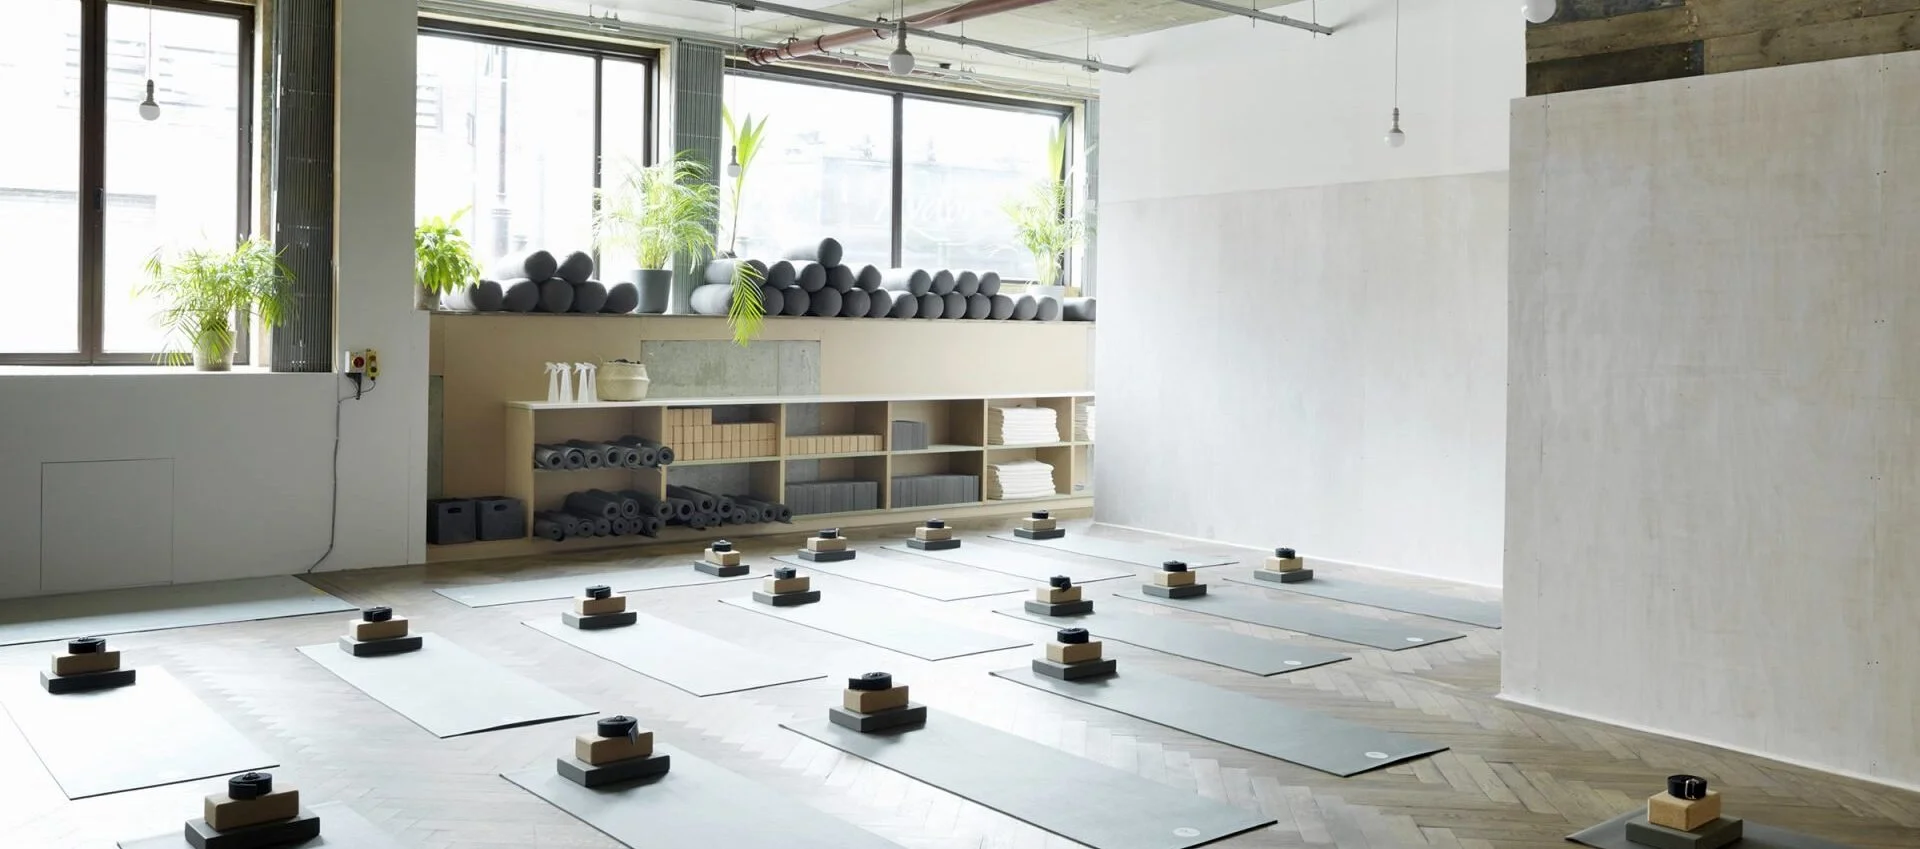 Start Your Stretching: Yoga Studios in Woodland Hills